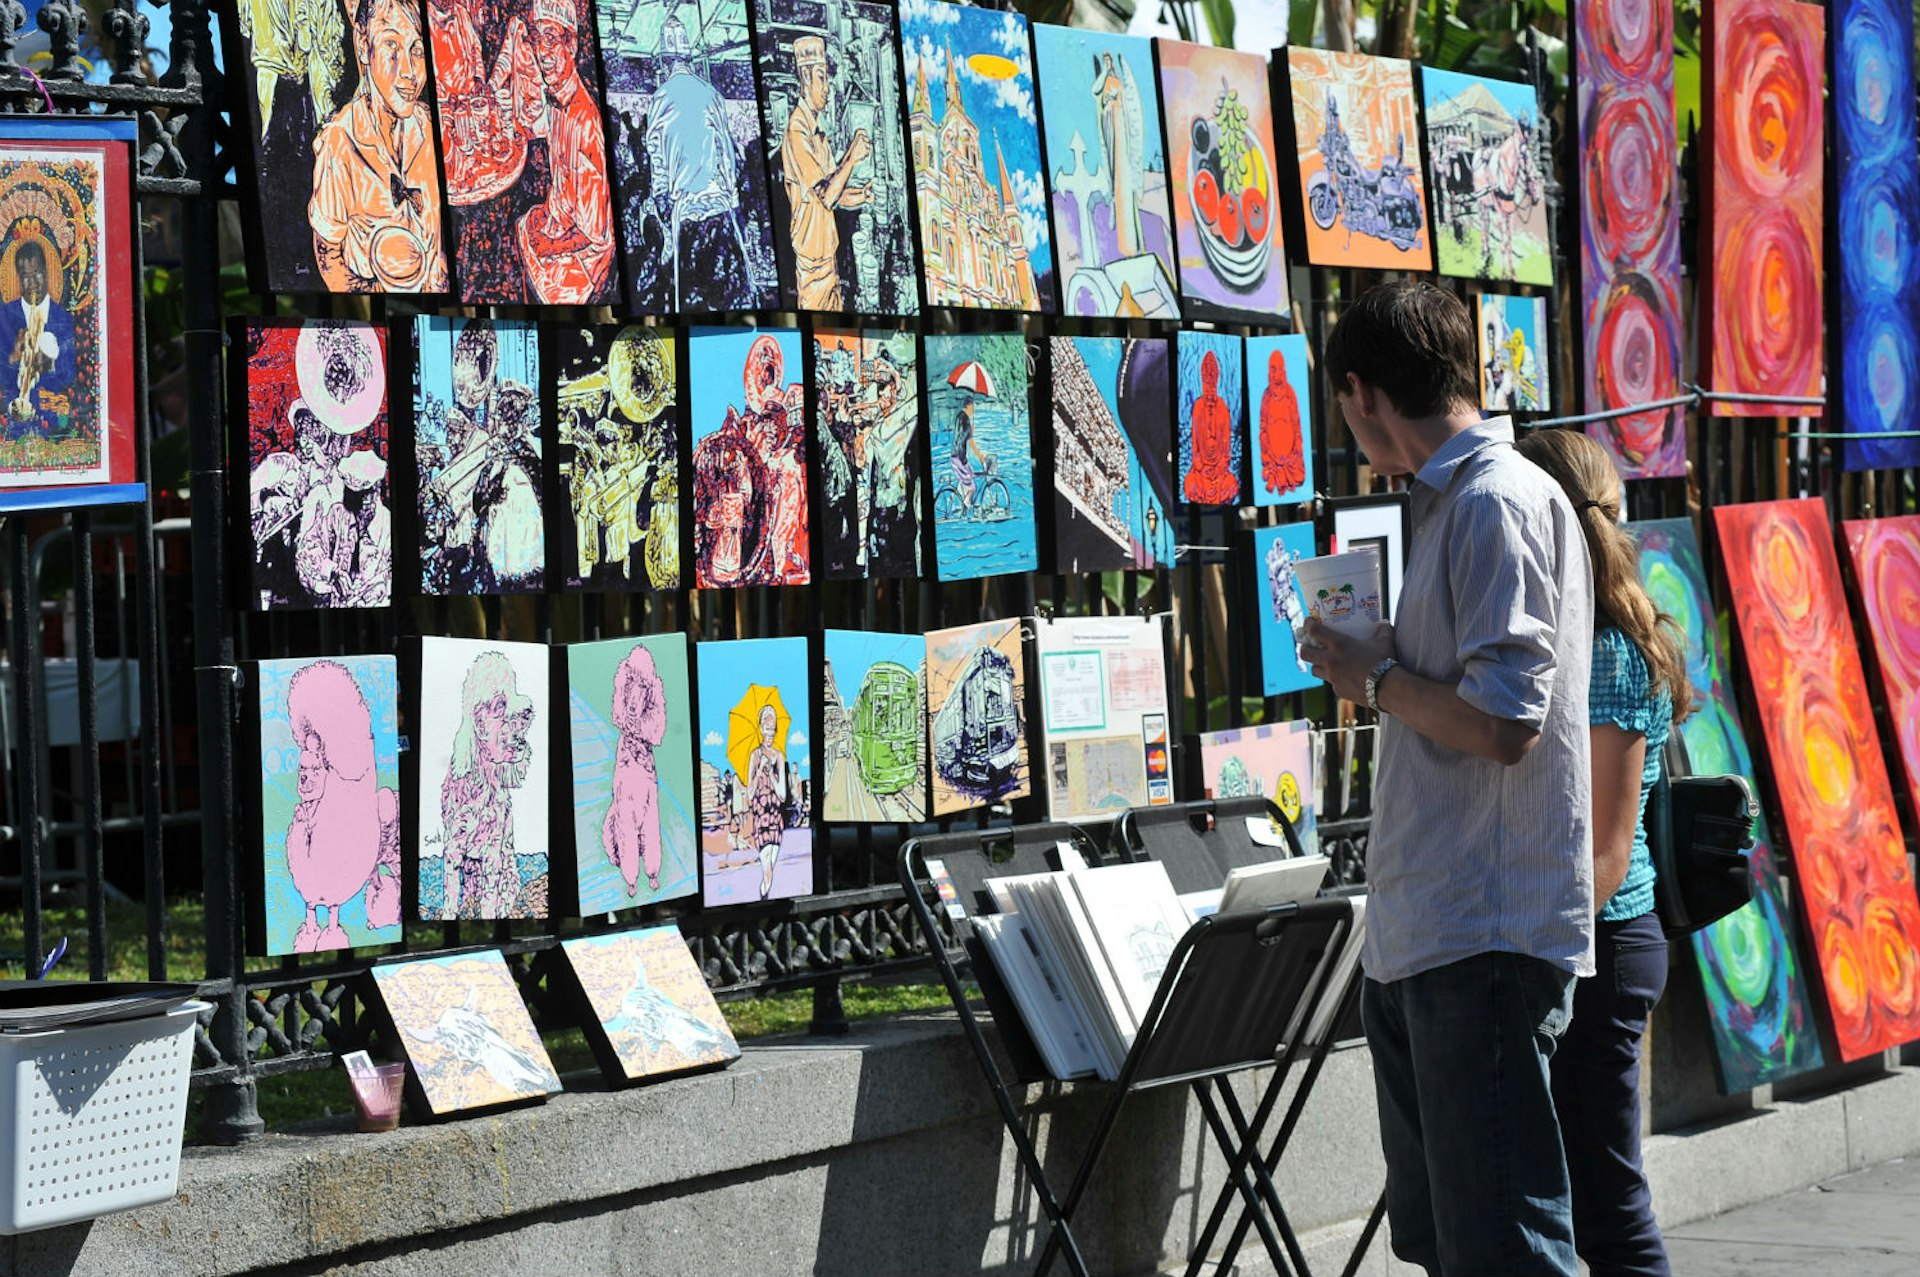 Browsing local art in the French Quarter. Image courtesy of New Orleans Convention and Visitors Bureau.